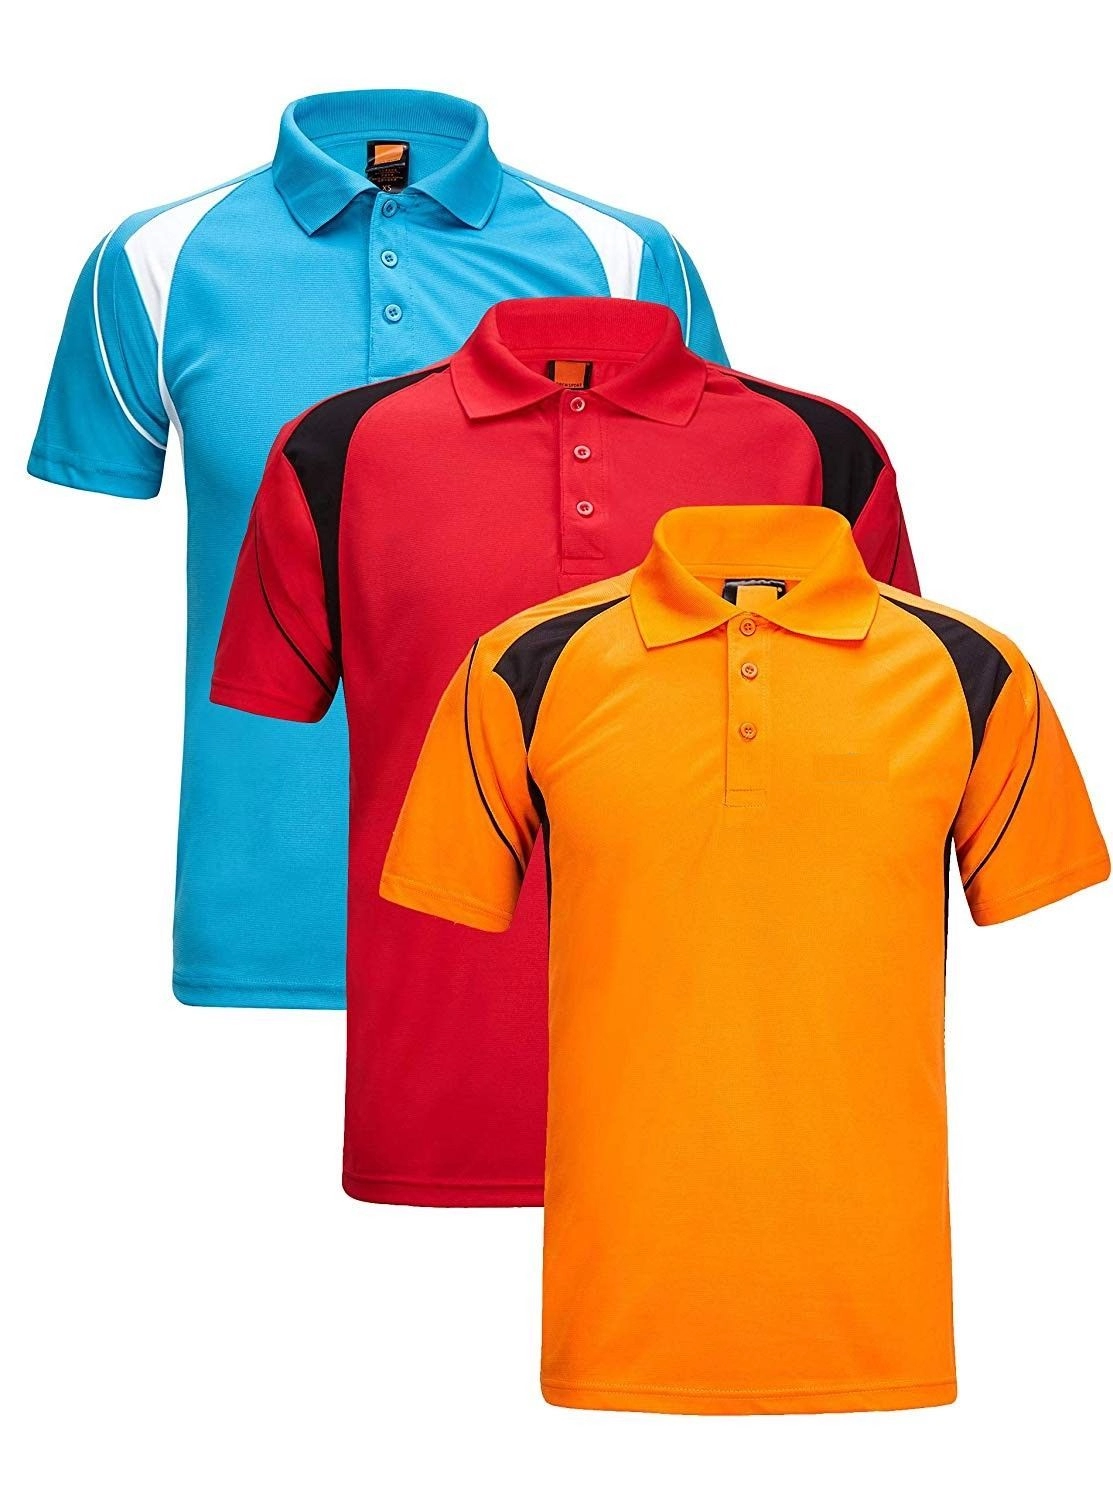 Looking for garments factories for the supply of custom made clothing from Bangladesh?